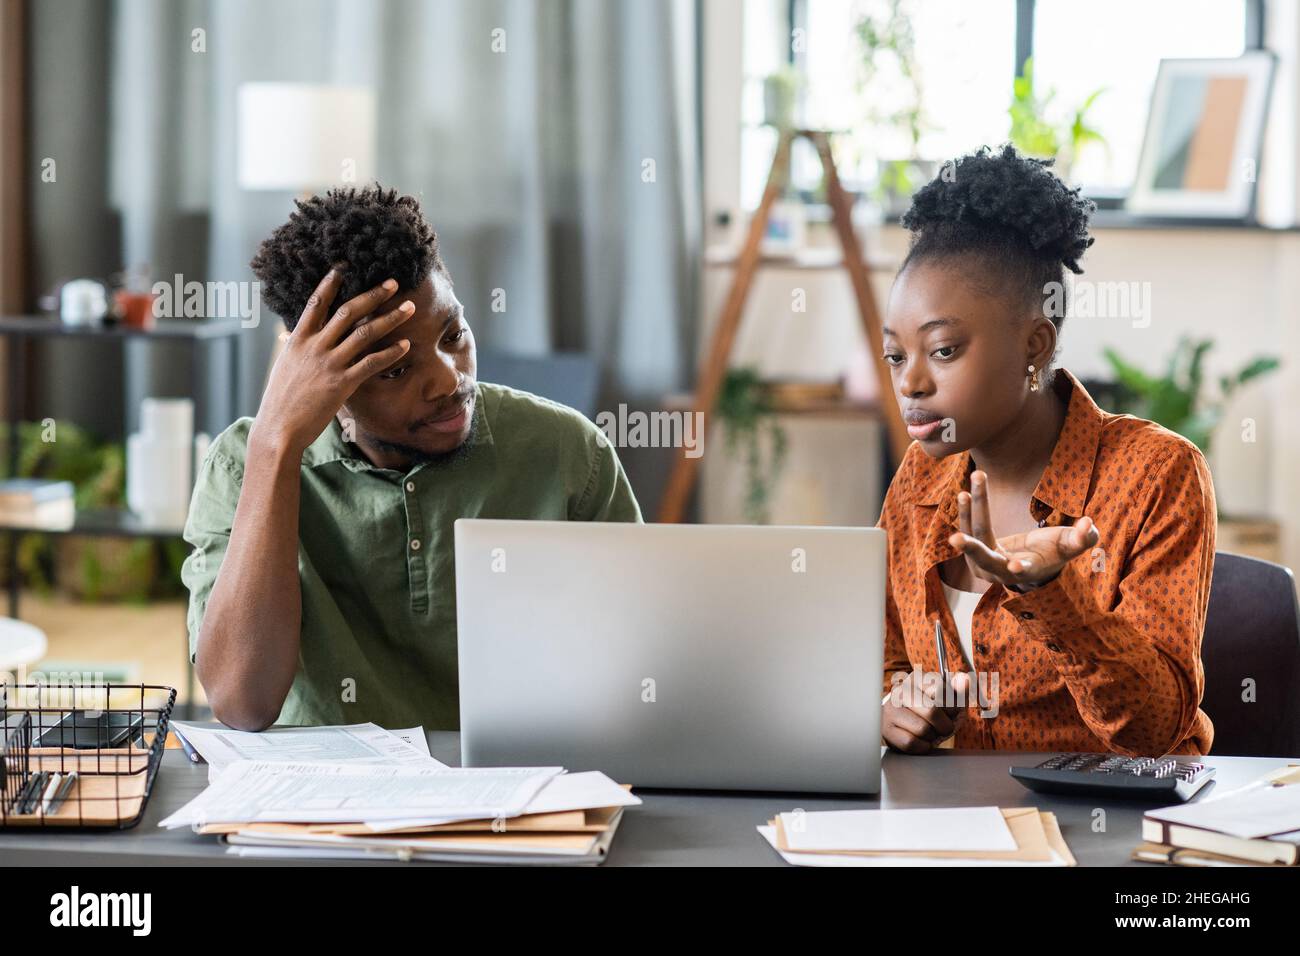 Young African woman and man looking at laptop screen while female explaining online data to male colleague Stock Photo